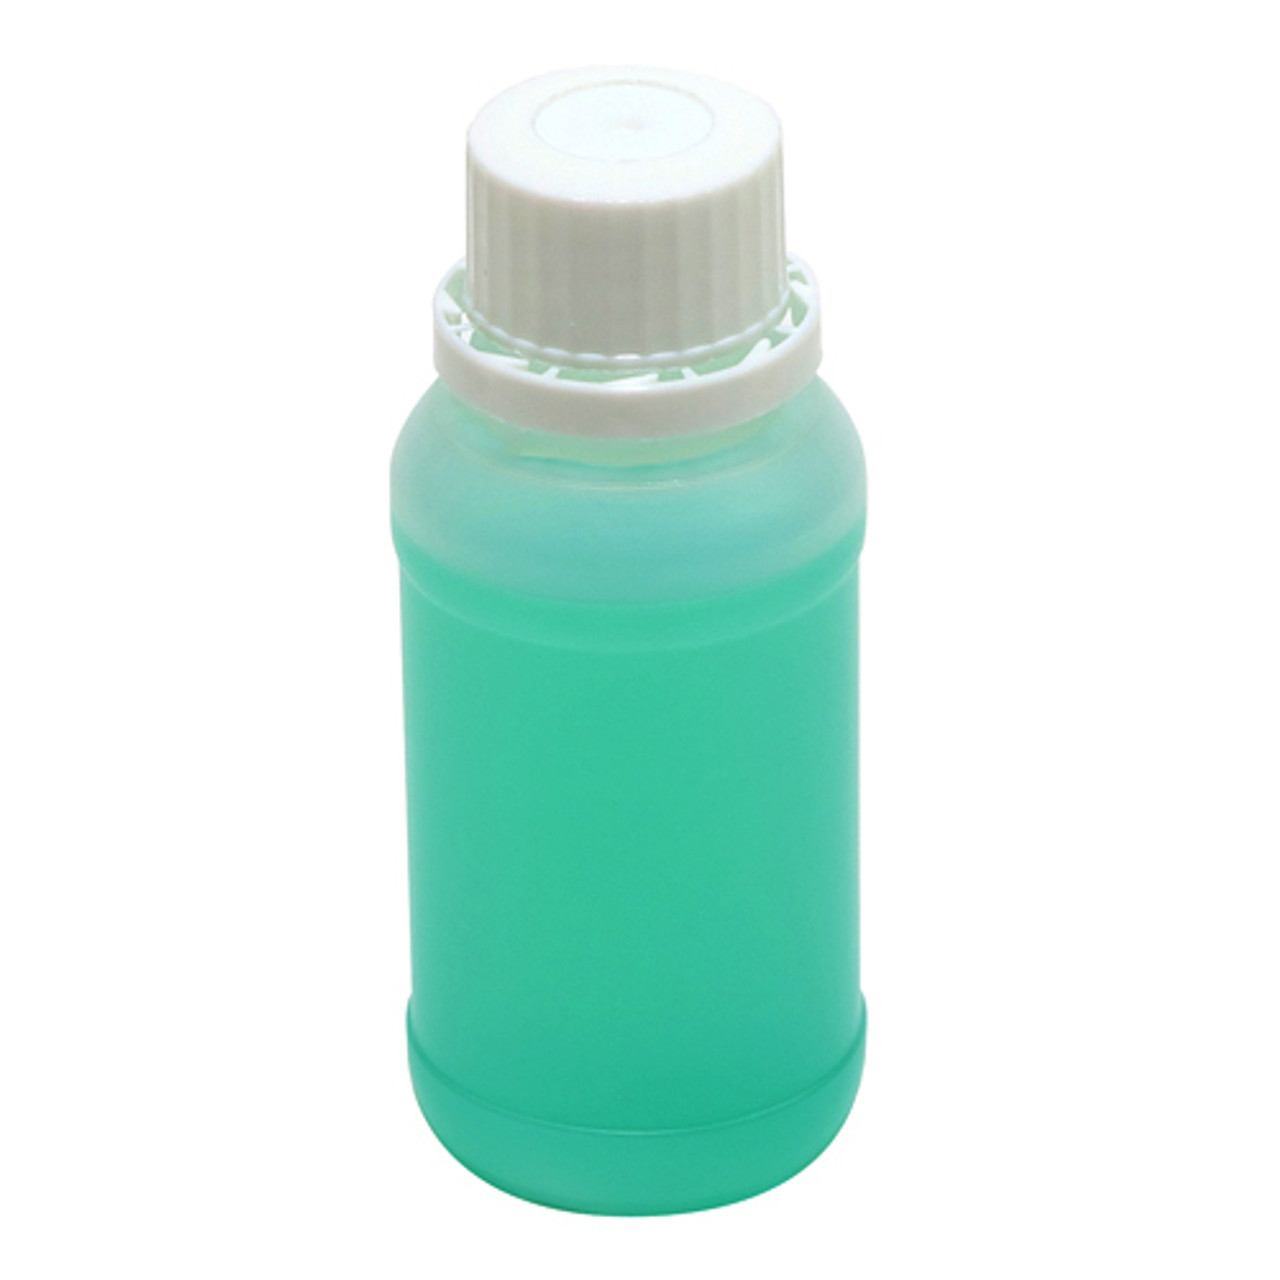 8 oz. (250 ml) PP Round Tamper Evident Container, 110mm